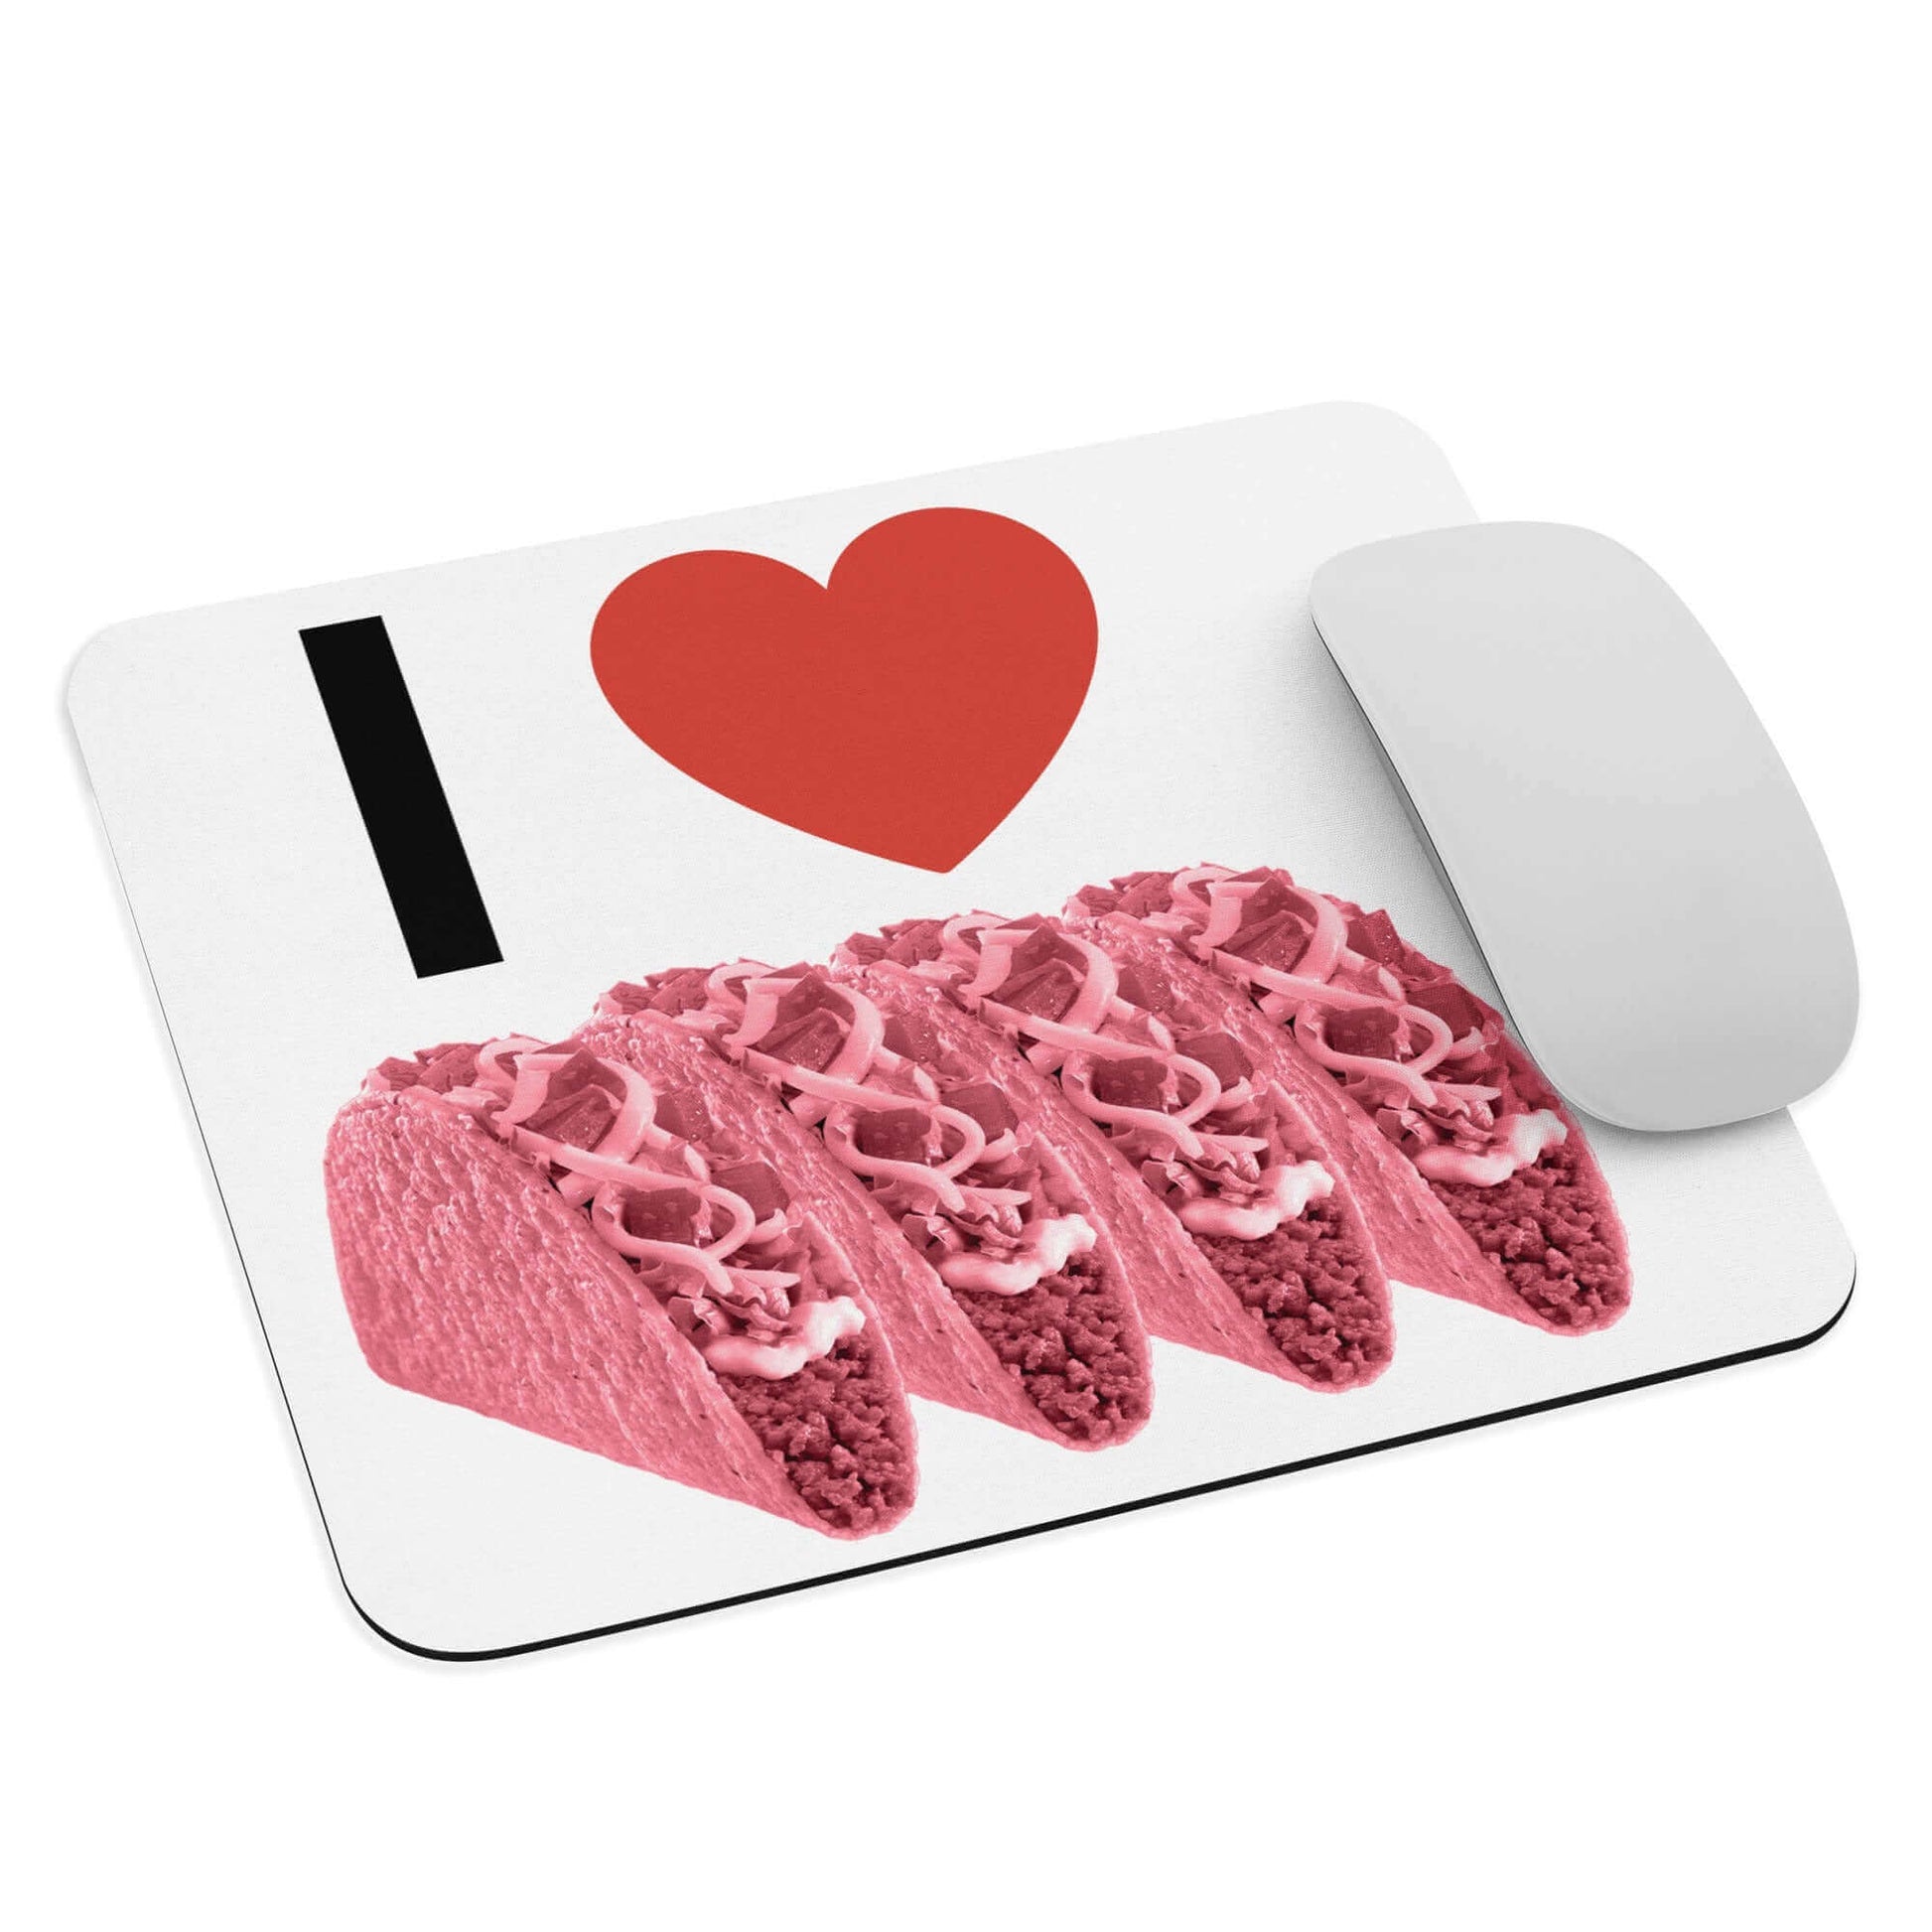 I LOVE pink tacos - Mouse pad - Horrible Designs